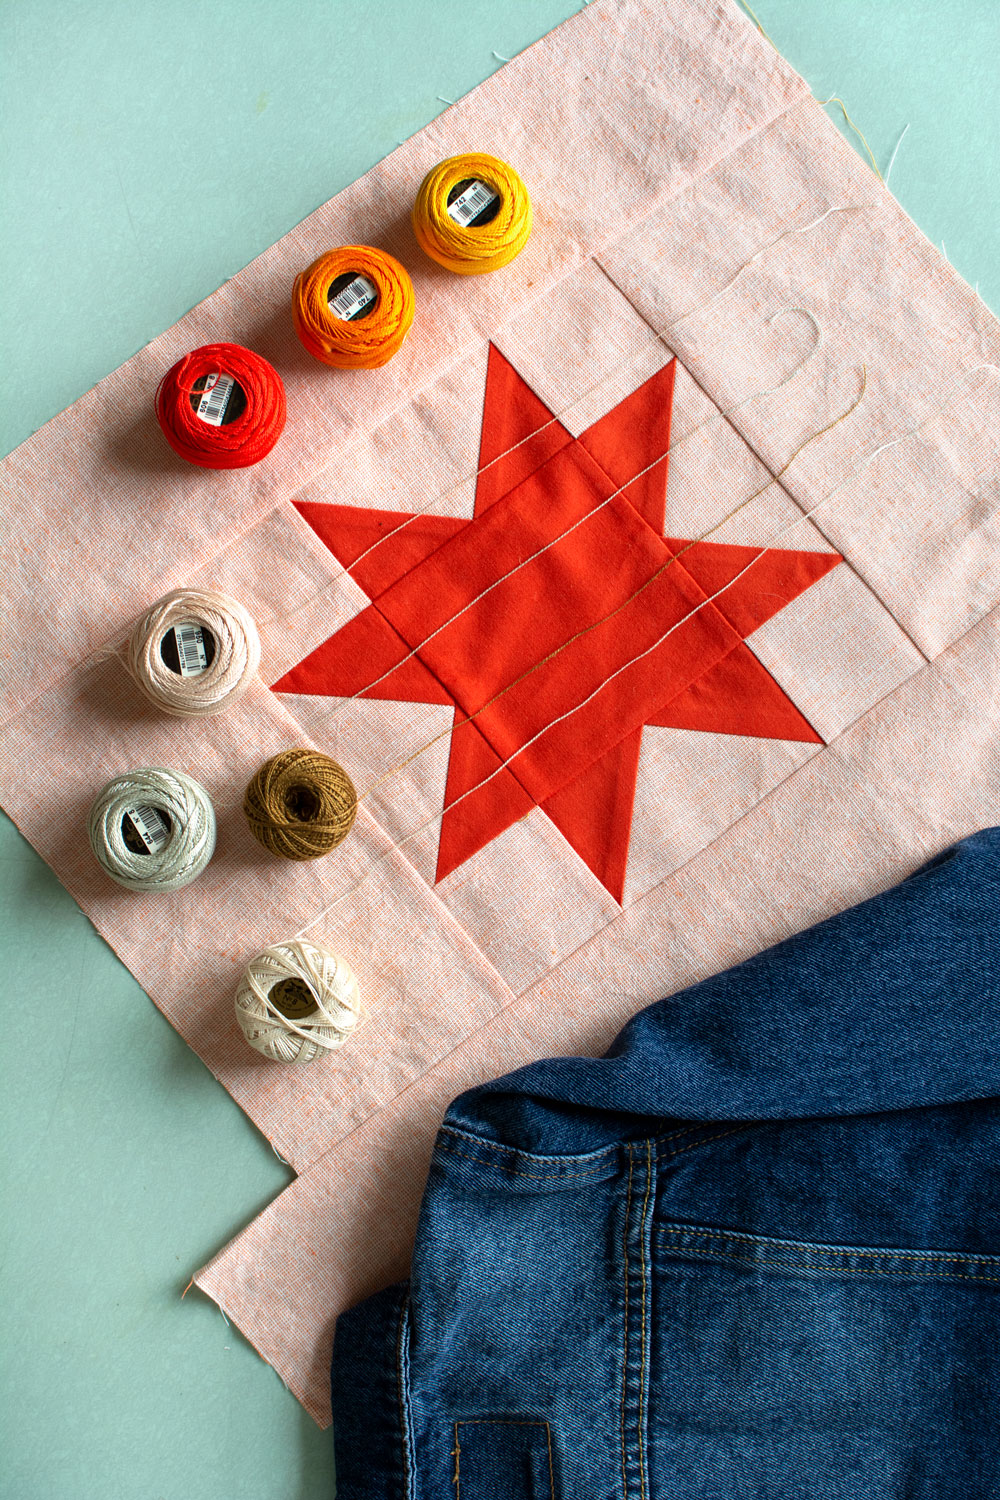 This simple patchwork jacket tutorial is the perfect way to breathe new life into old clothes. Upcycle denim or old clothing to make quilted clothing! suzyquilts.com #upcycleclothes #jackettutorial